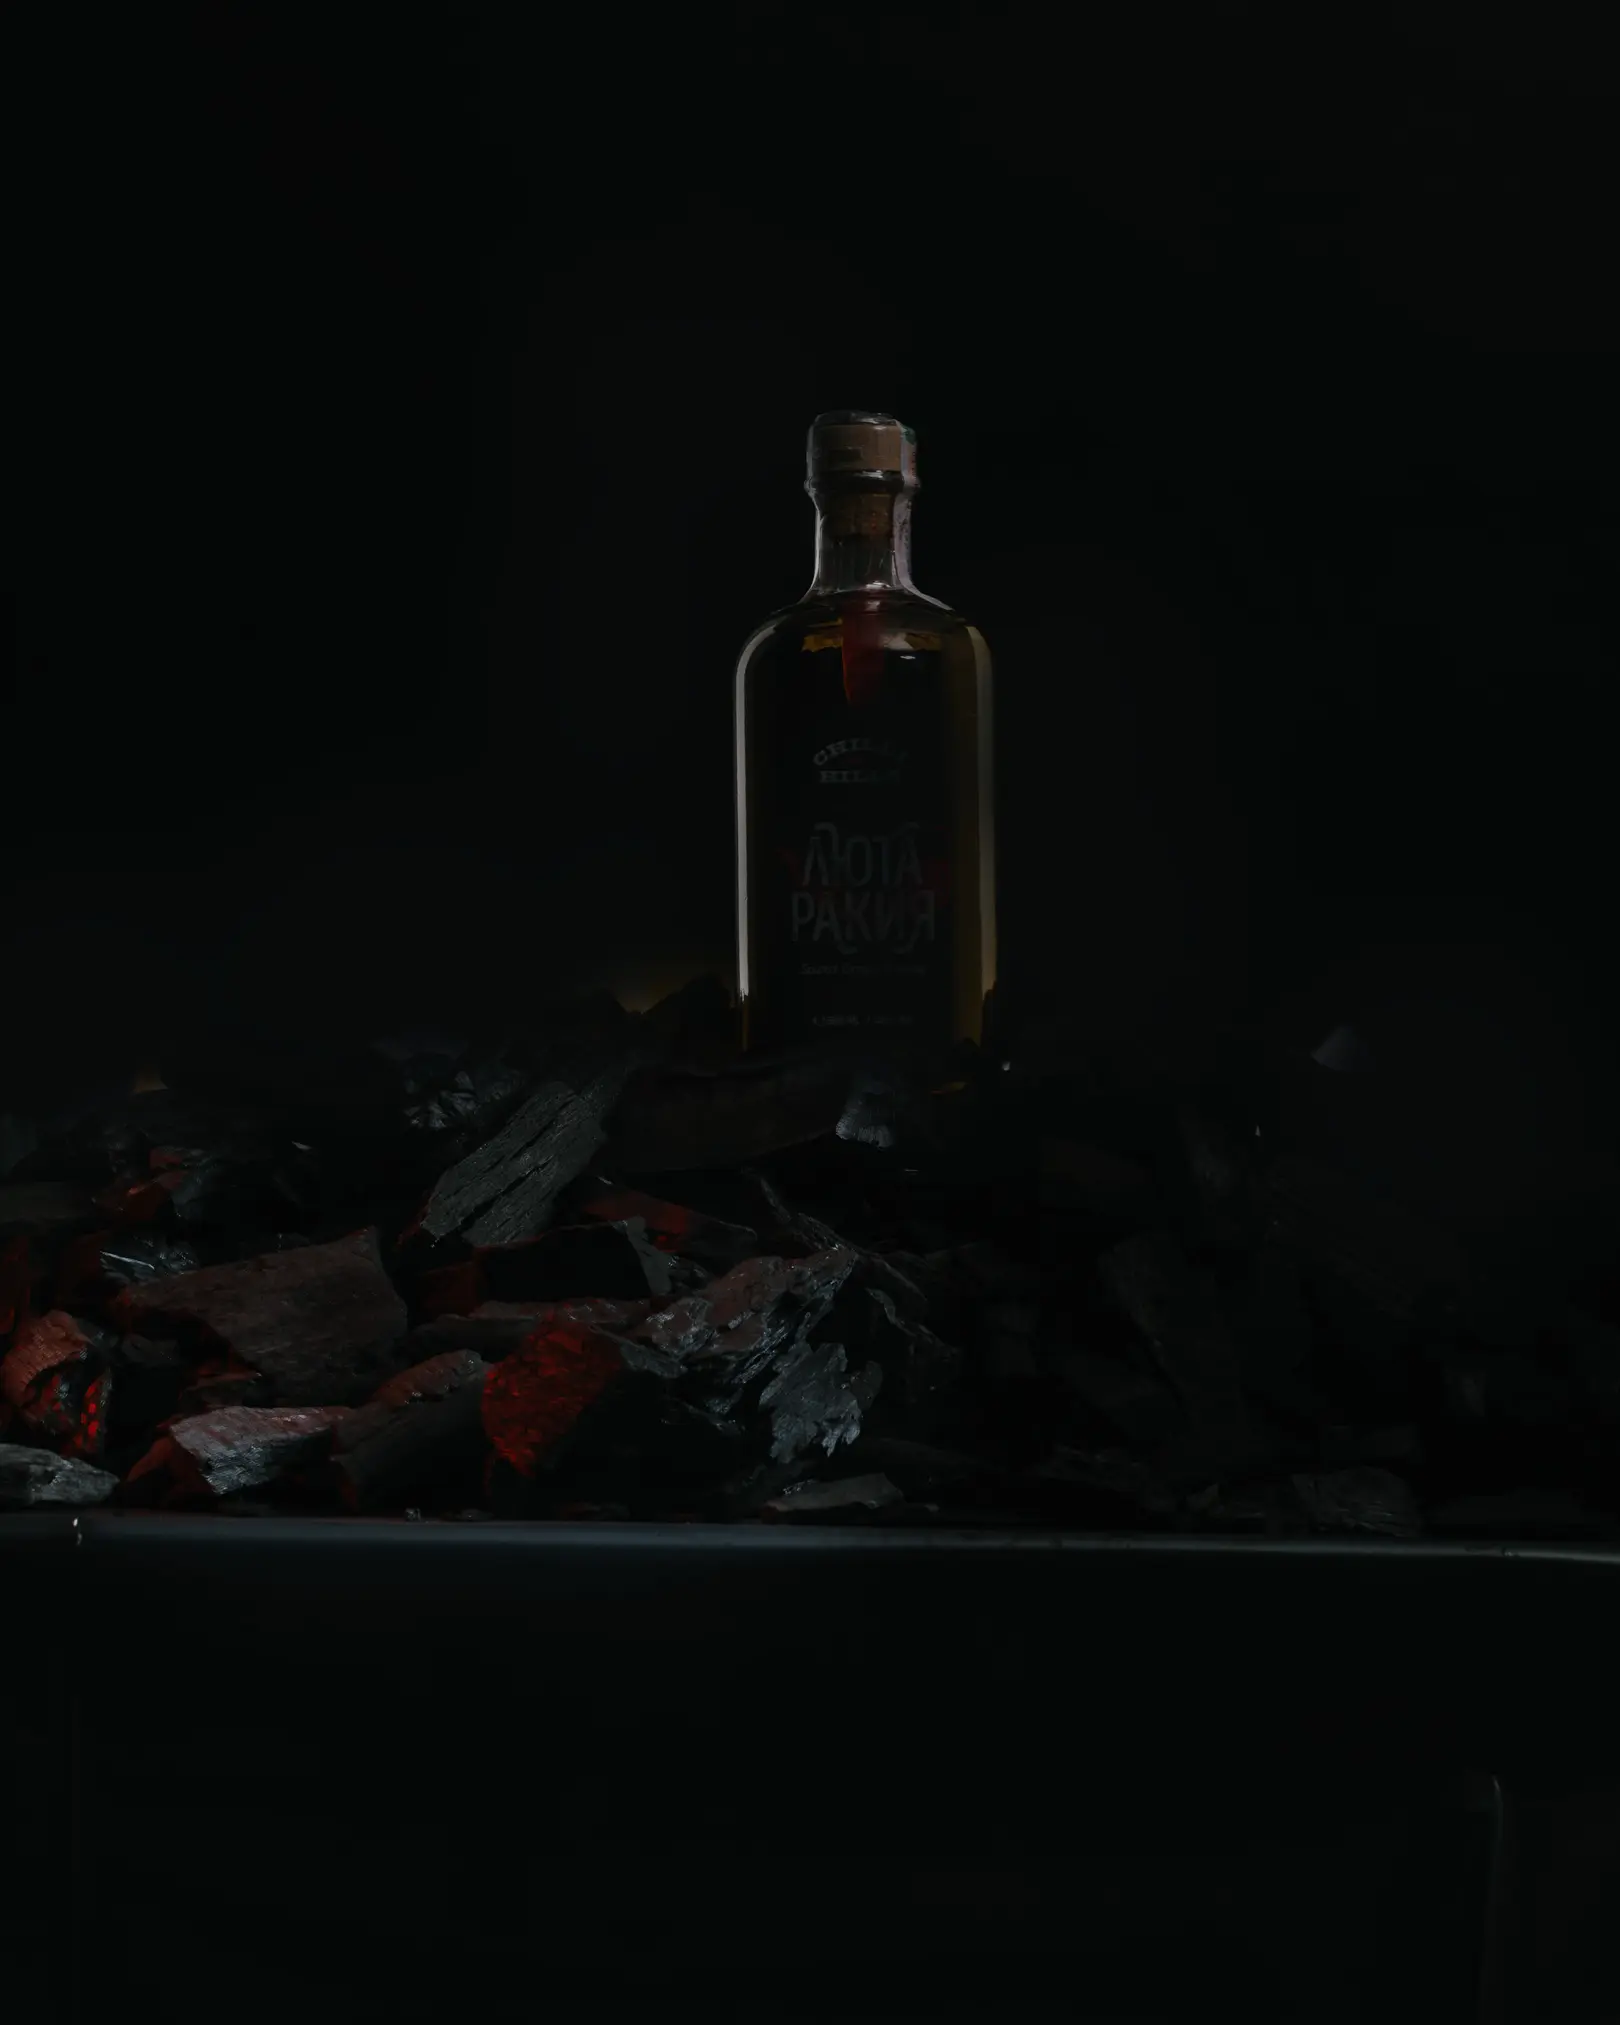 Light Schema 4 Result 1. The photo shows the result of shooting a bottle according to the light scheme shown in schema 4. The viewer red coal.